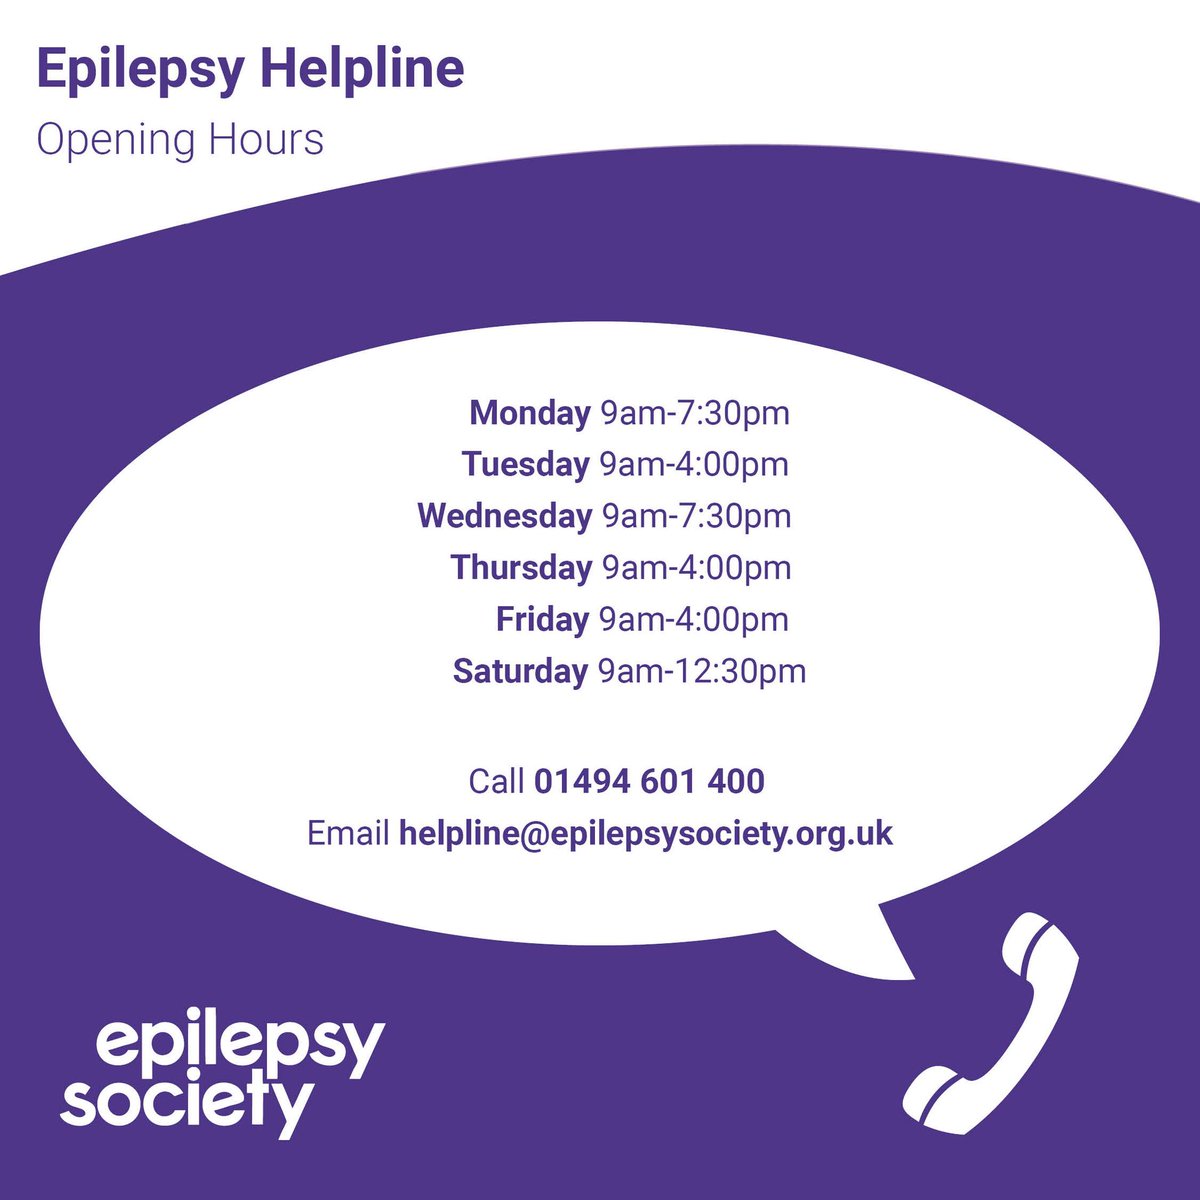 We are excited to announce that from today, Tuesday 11 April, you will be able to talk to our Helpline team via our new webchat as well as by phone or email. #YouSaidWeDid #epilepsy bit.ly/3m7nvLA